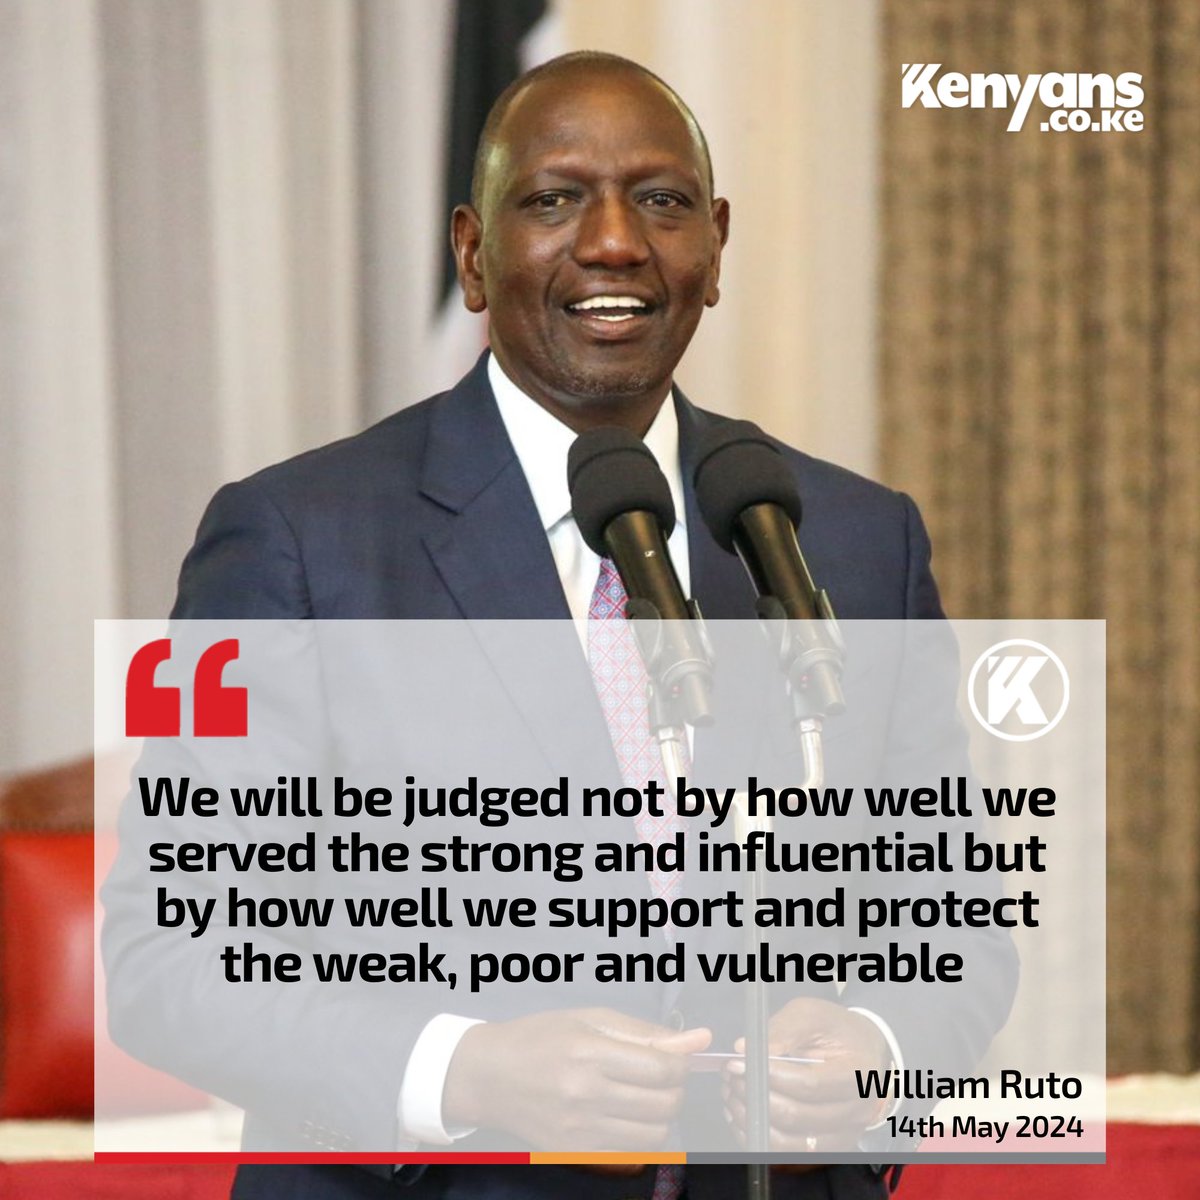 We will be judged by how well we support and protect the weak, poor and vulnerable - President Ruto